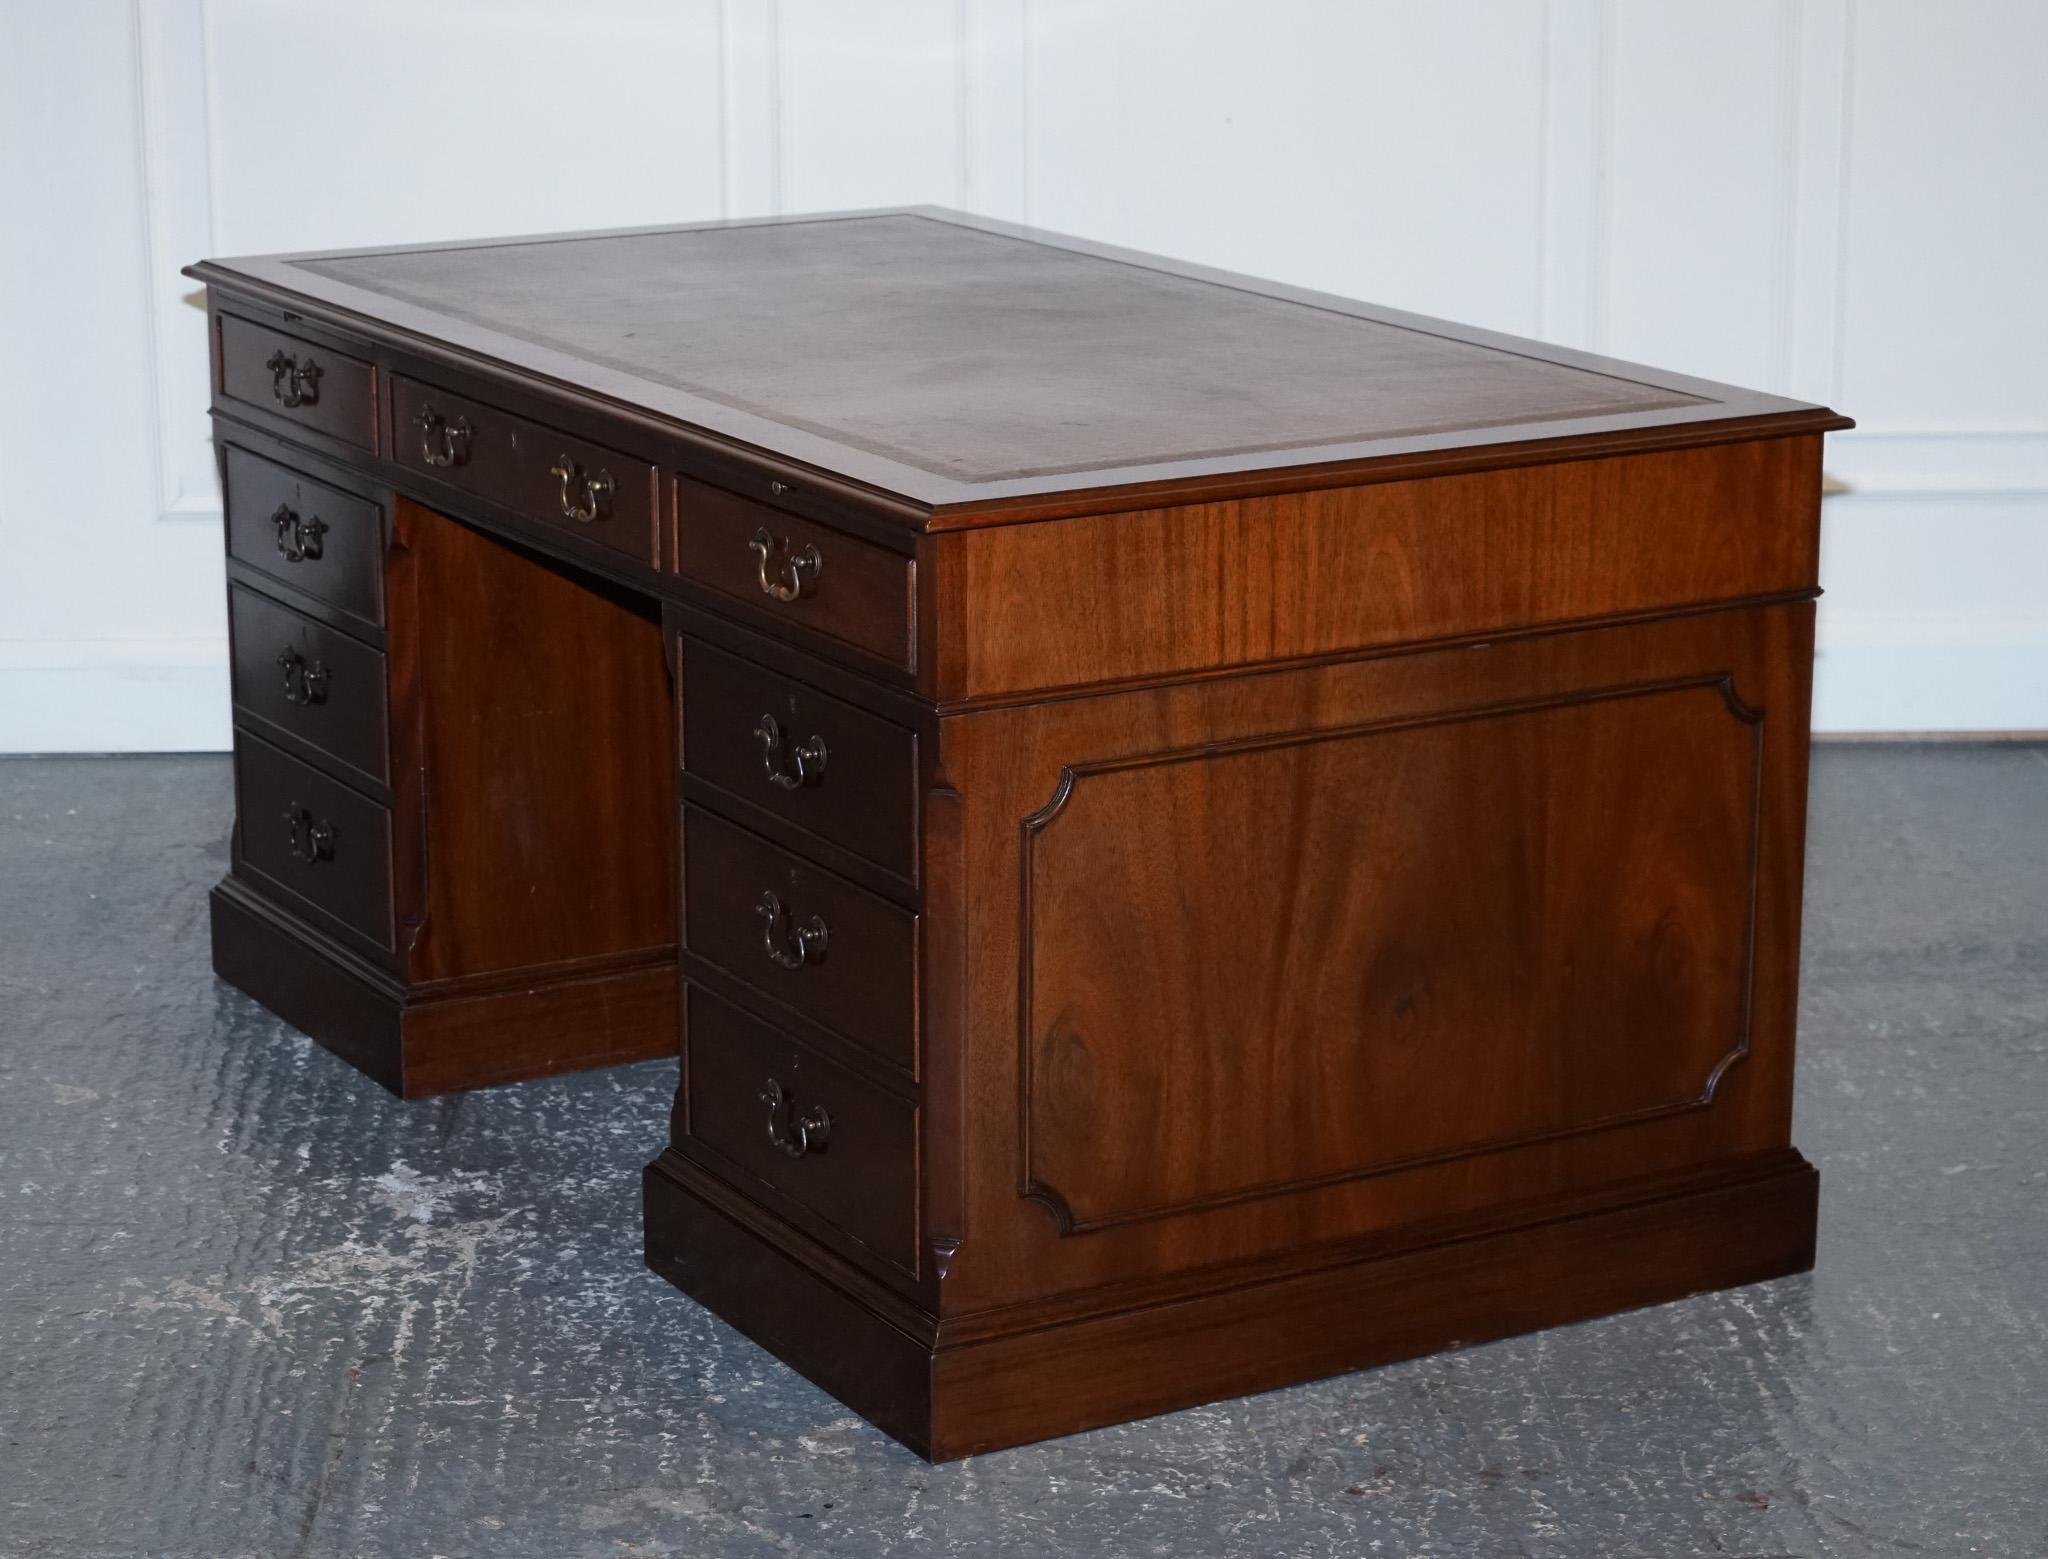 STUNNING LARGE TWiN PEDESTAL DESK BROWN LEATHER TOP SLIDING OUT TRAYS 8 DRAWERS For Sale 8